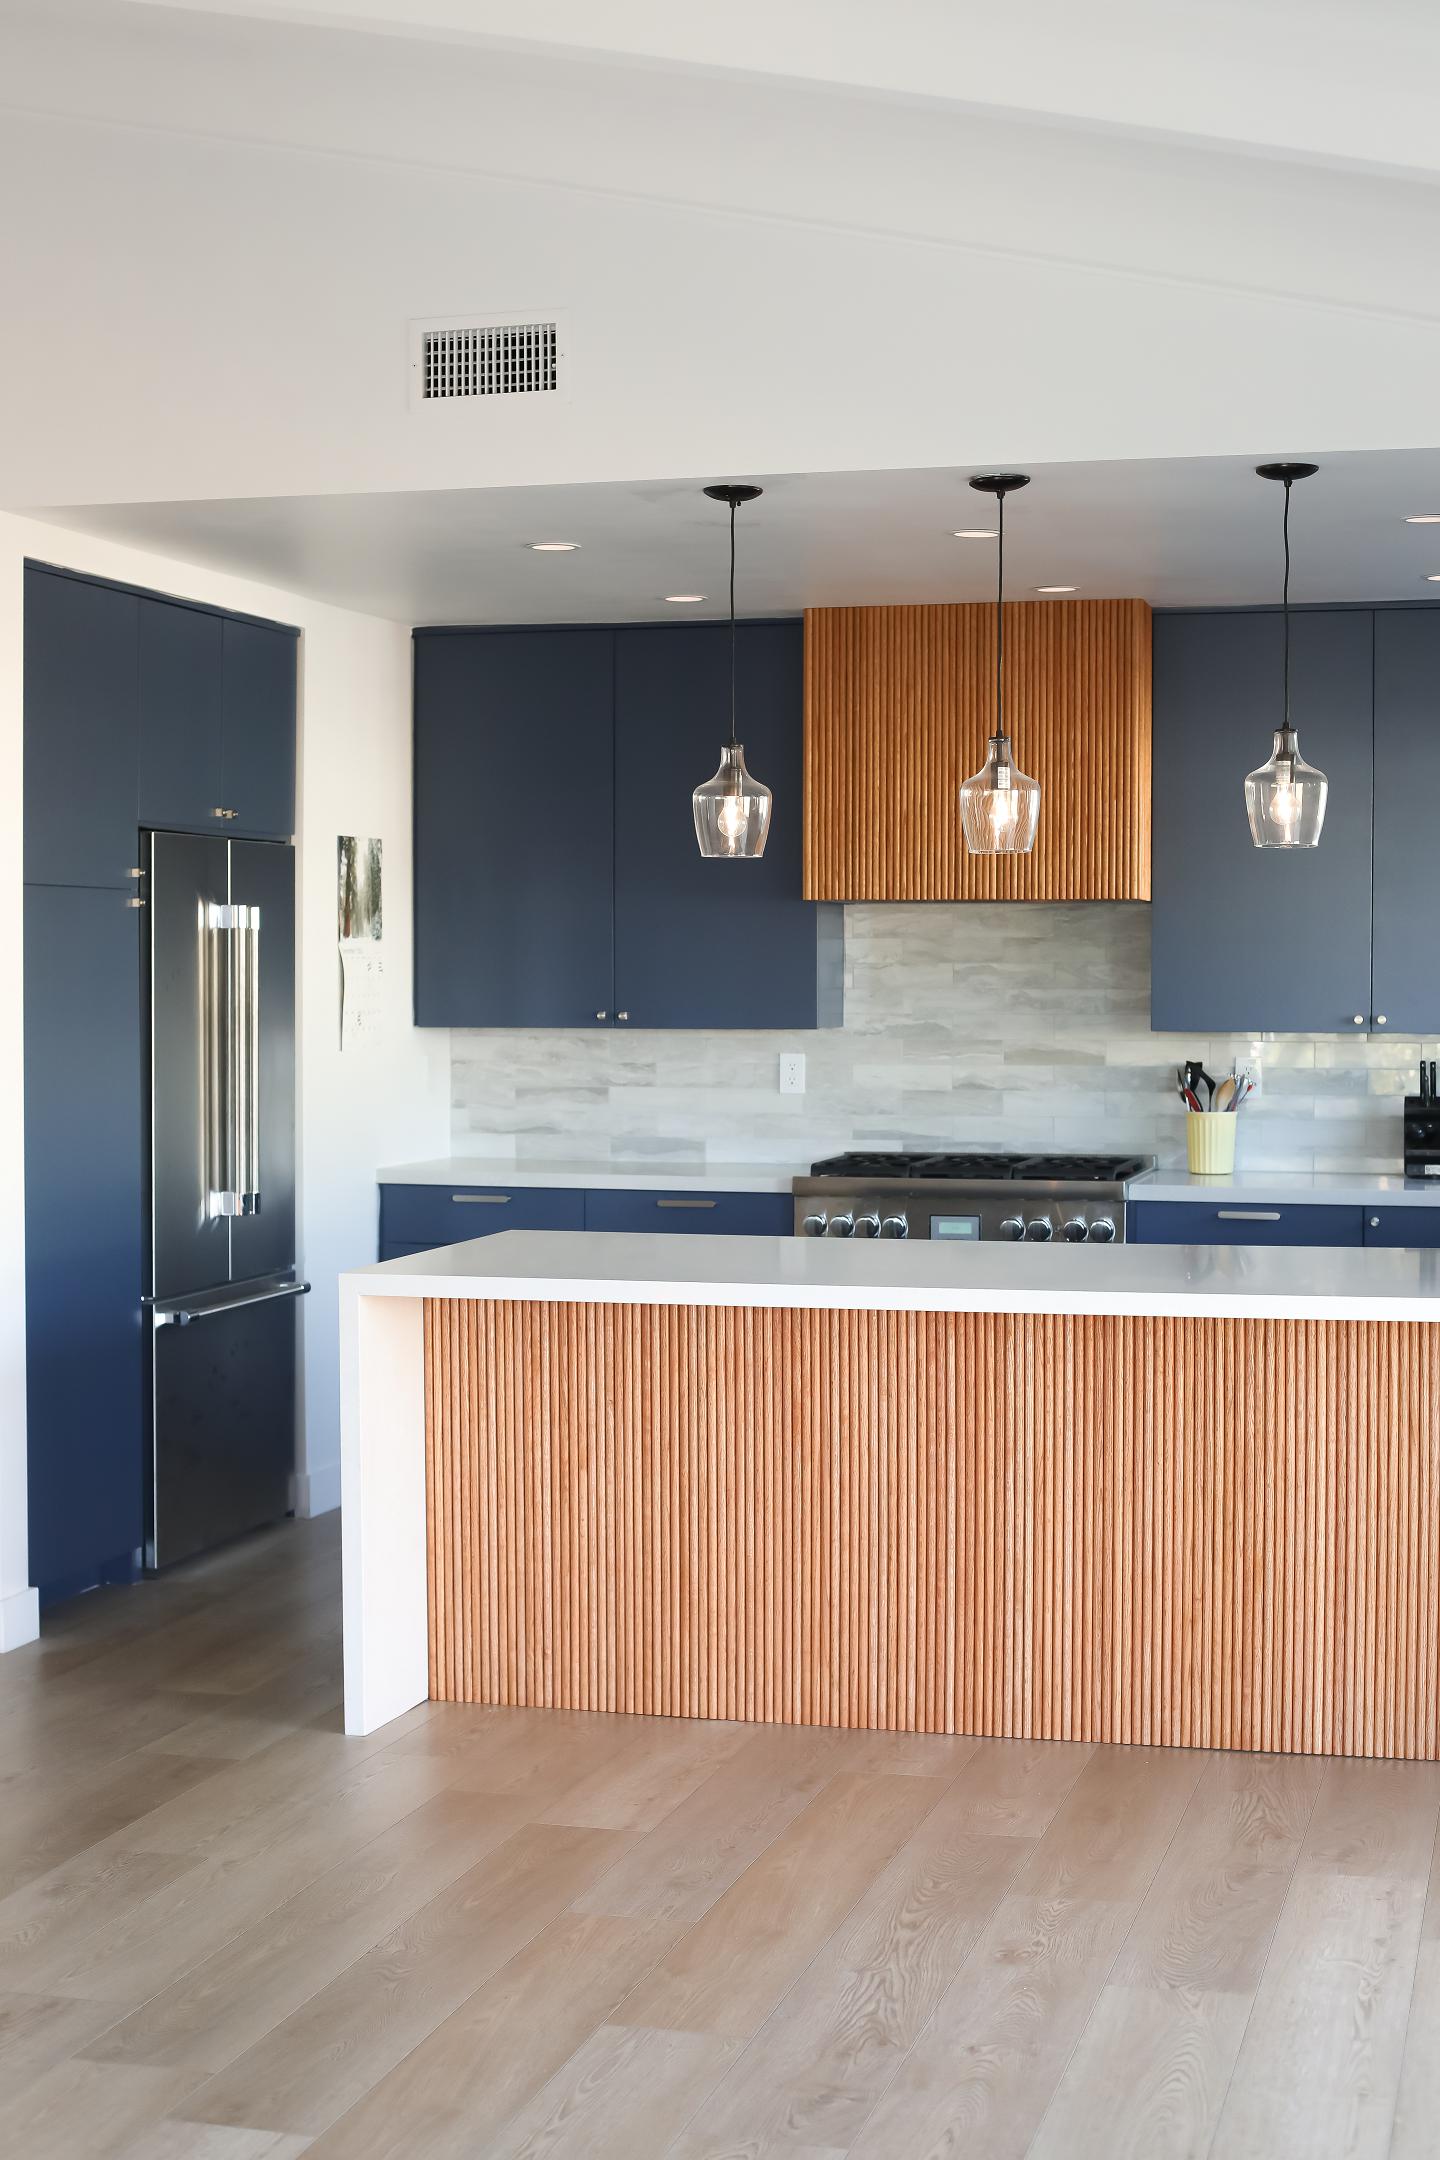 Modern kitchen interior with blue cabinets and wooden accents.